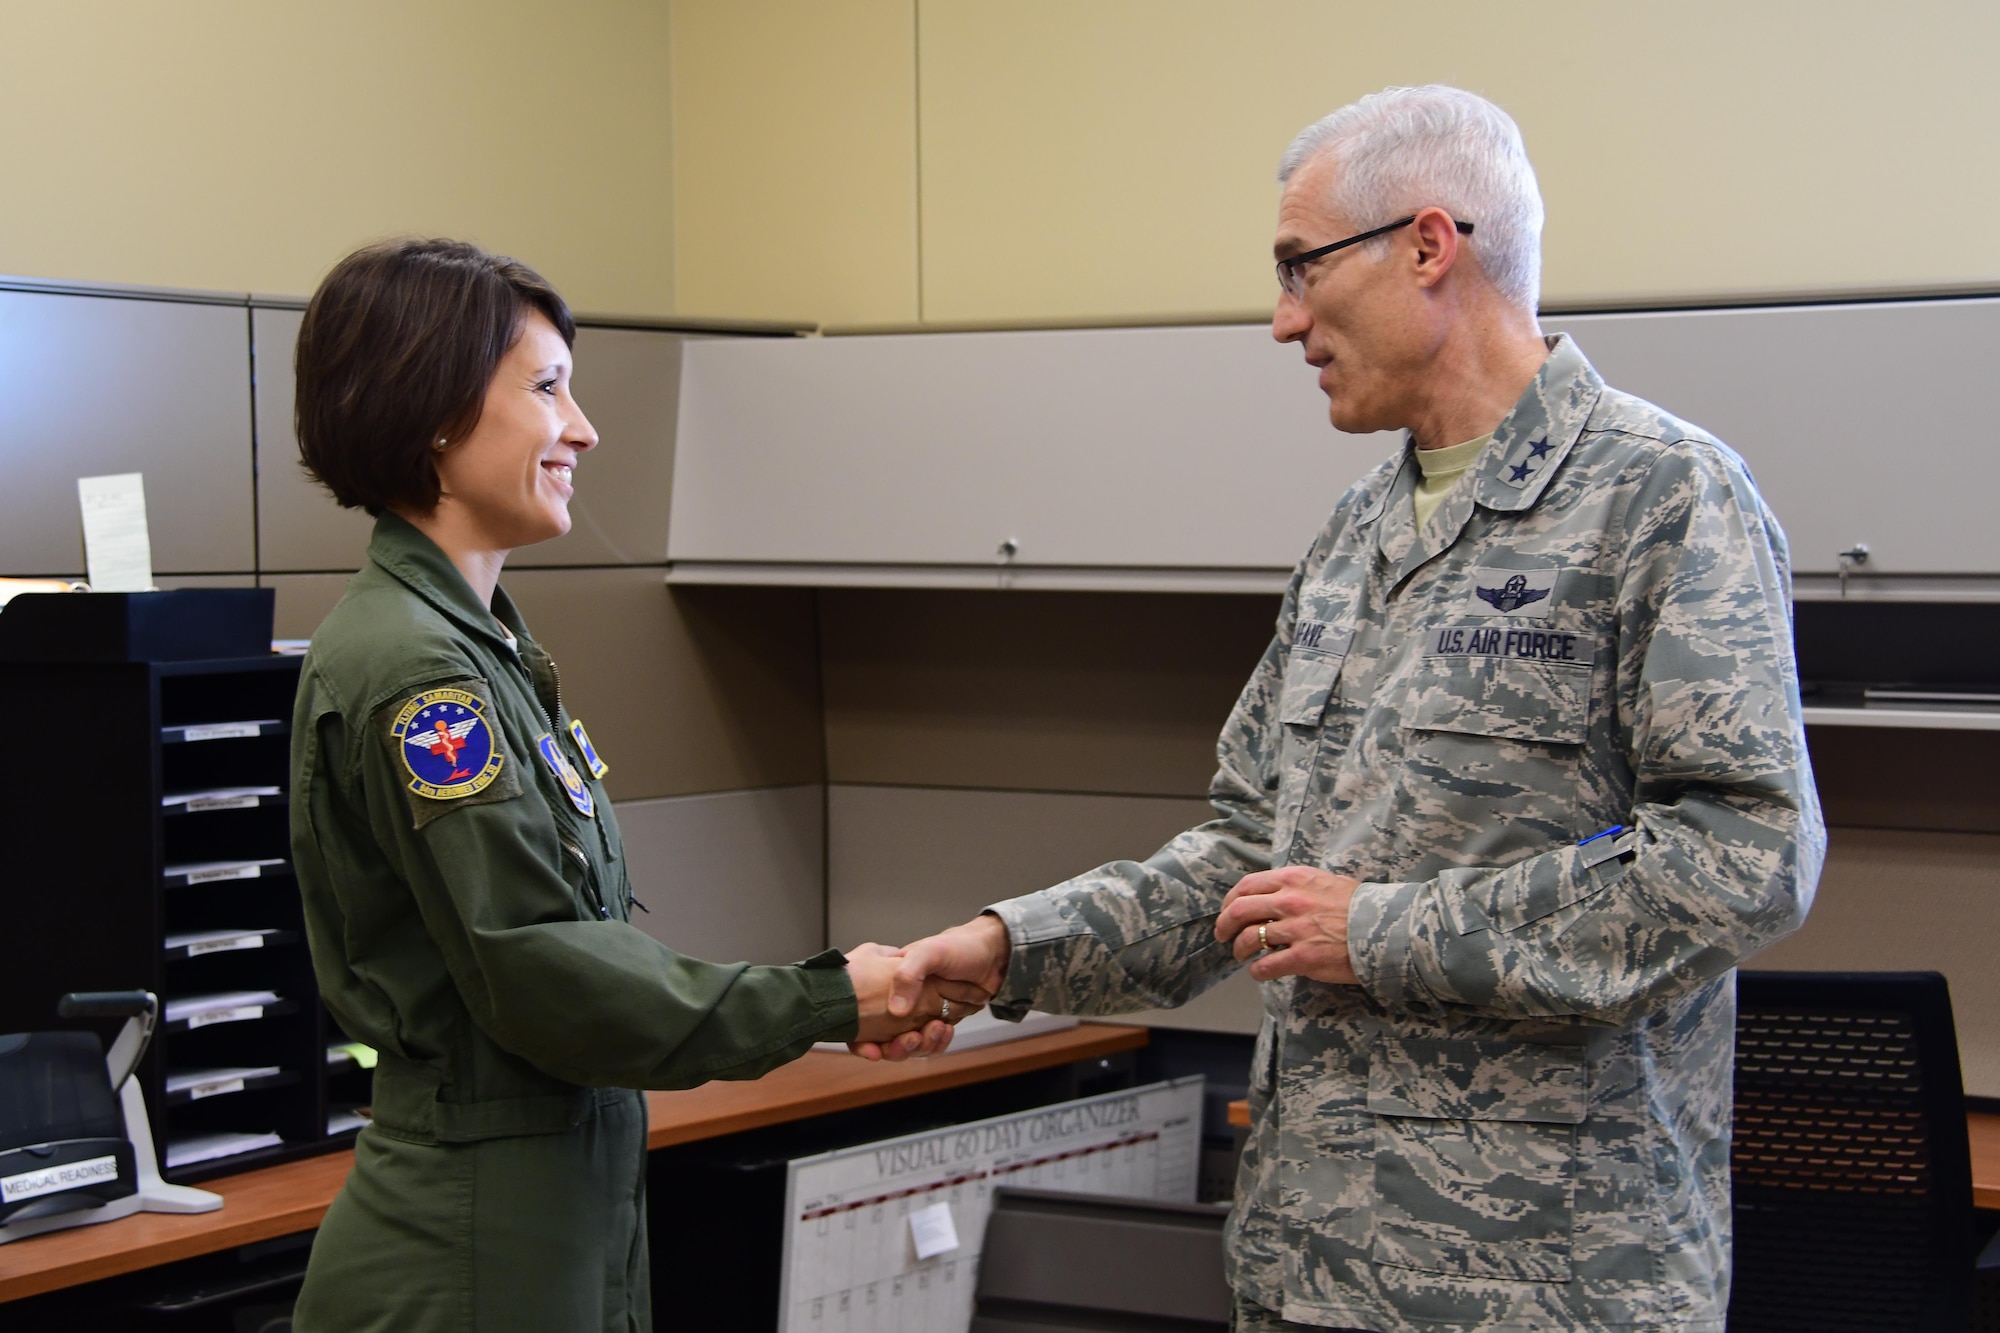 Maj. Gen. Craig La Fave, 22nd Air Force commander, coins Staff Sgt. Kea Hartley, 94th Aeromedical Evacuation Squadron medical technician, at Dobbins Air Reserve Base, Georgia Dec. 2, 2017. Hartley was recognized for her work backfilling as commander support for six months. (U.S. Air Force photo by Staff Sgt. Miles Wilson)